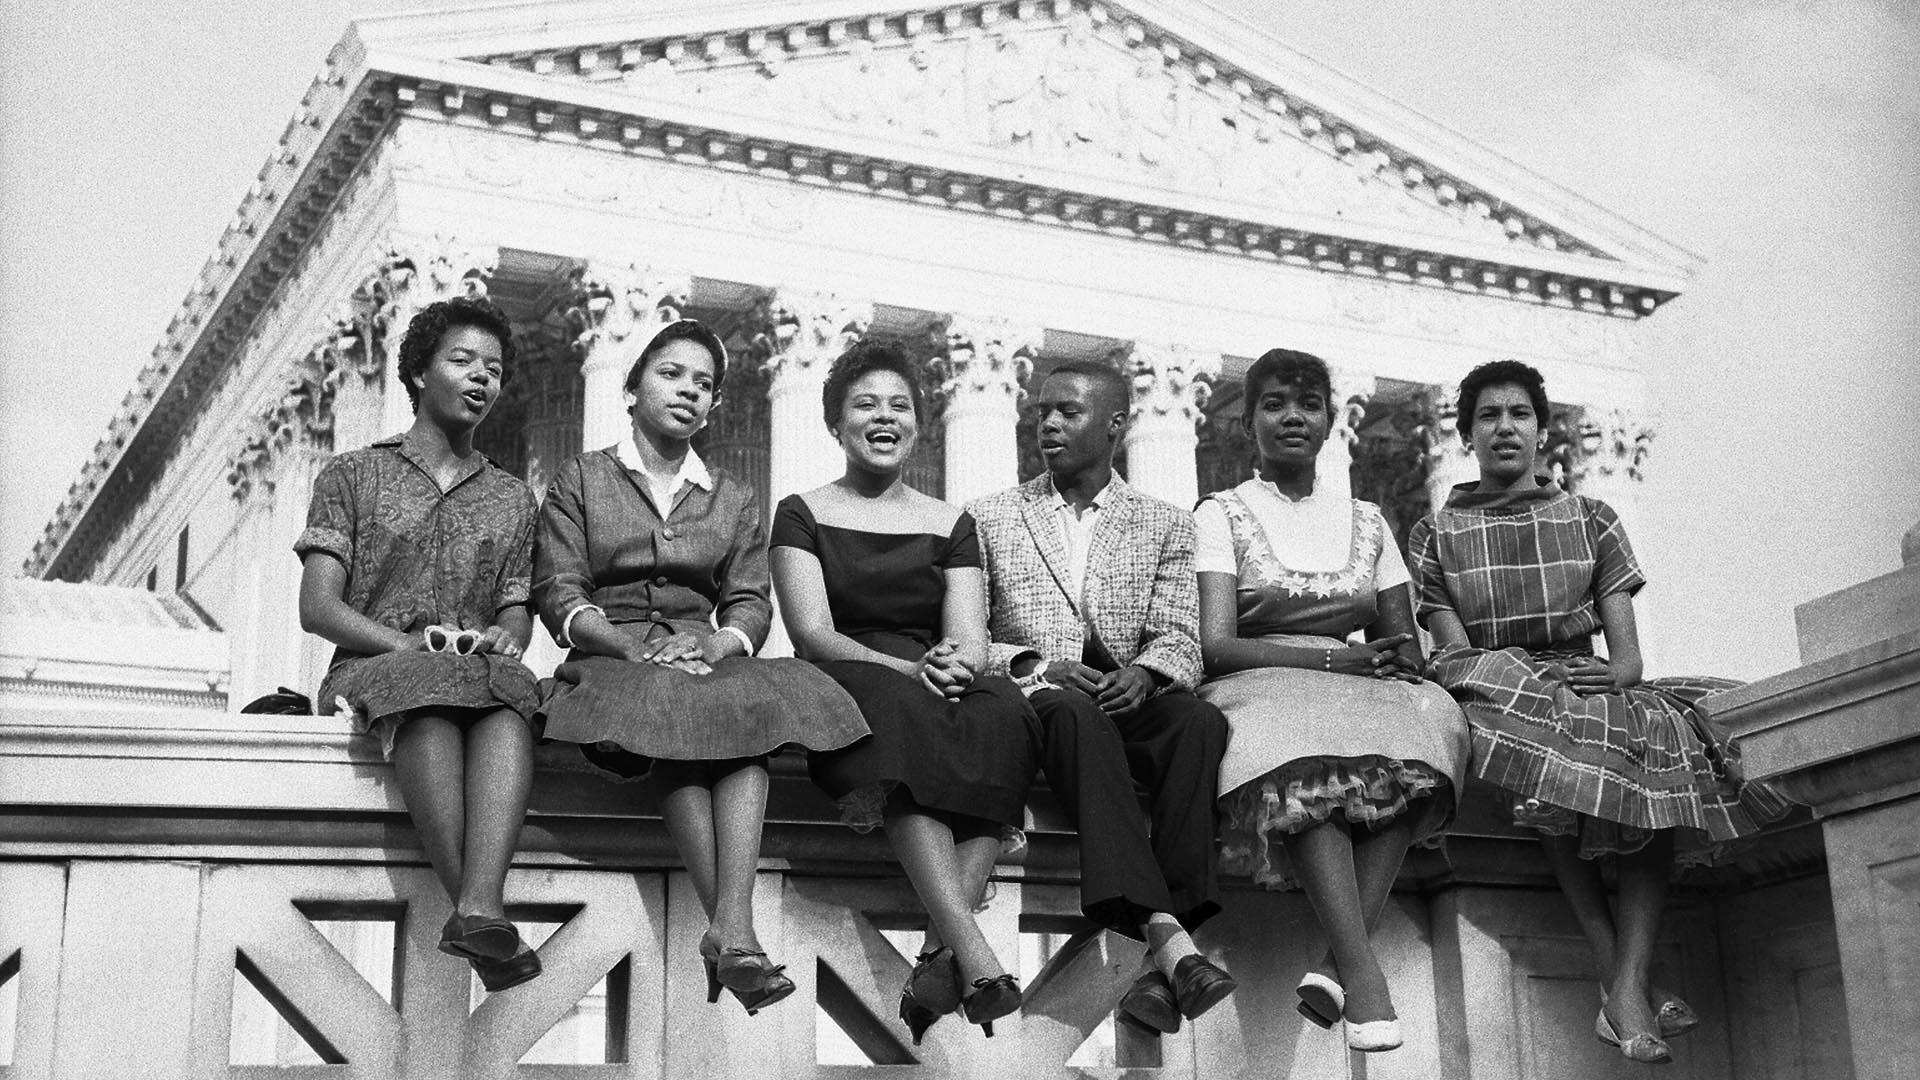 Six Black children who attended Little Rock's Central High School sit outside the Supreme Court in this 1958 photo. 从左到右:卡洛塔墙, 15, Melva Patillo, 16, 托马斯杰佛逊, 15, 米妮·简·布朗, 16, Gloria Ray, 15, 伊丽莎白·埃德克福德, 16. 图片来源:Getty Images